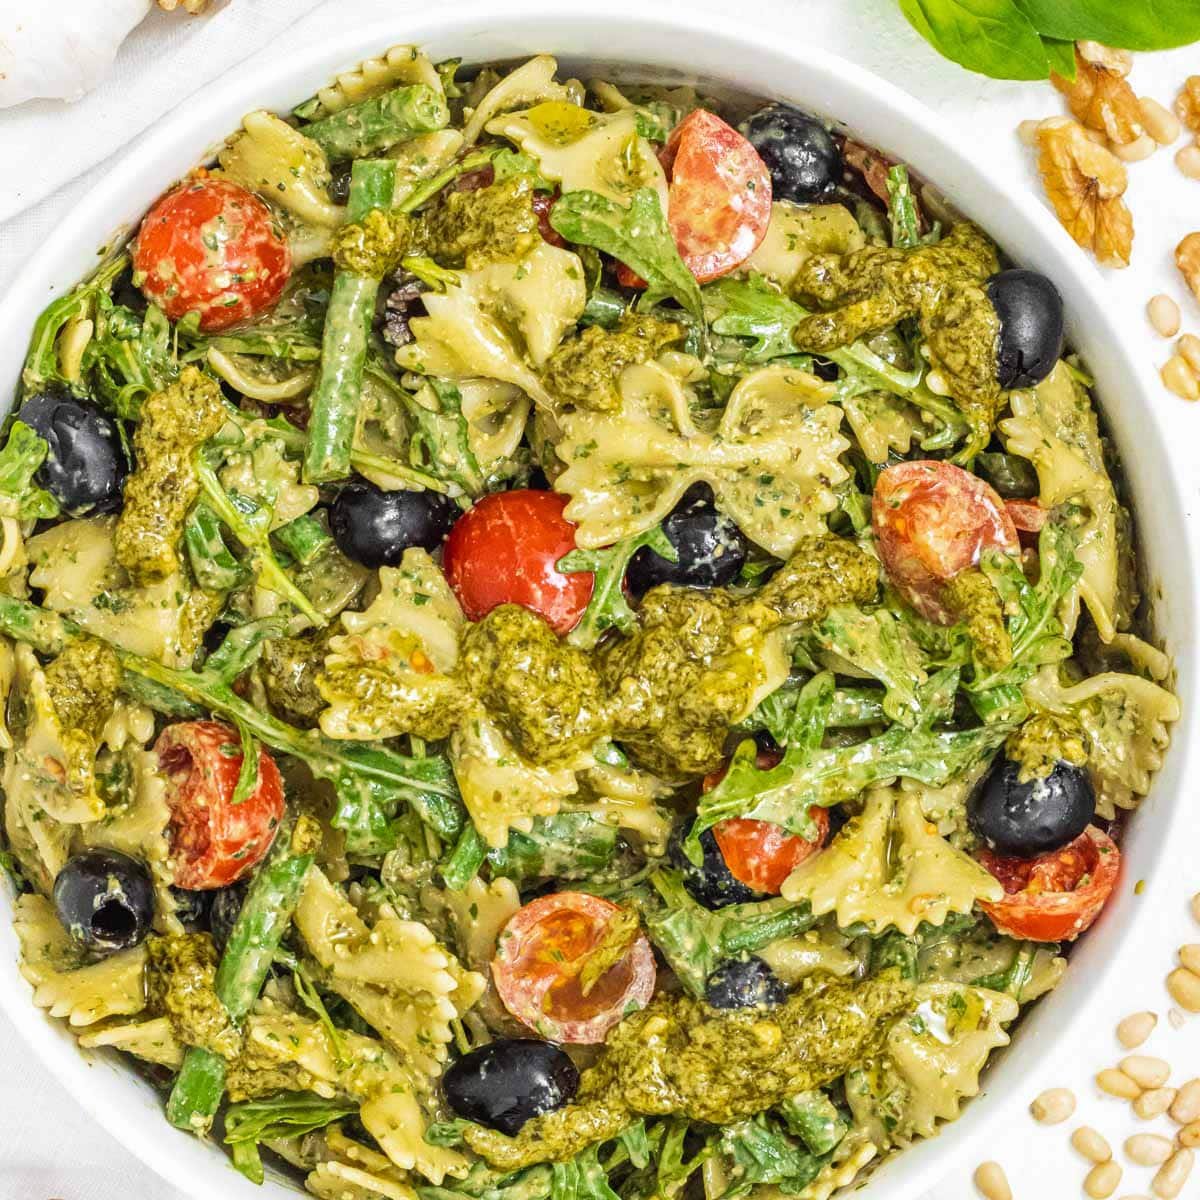 Pesto pasta salad in a bowl with tomatoes